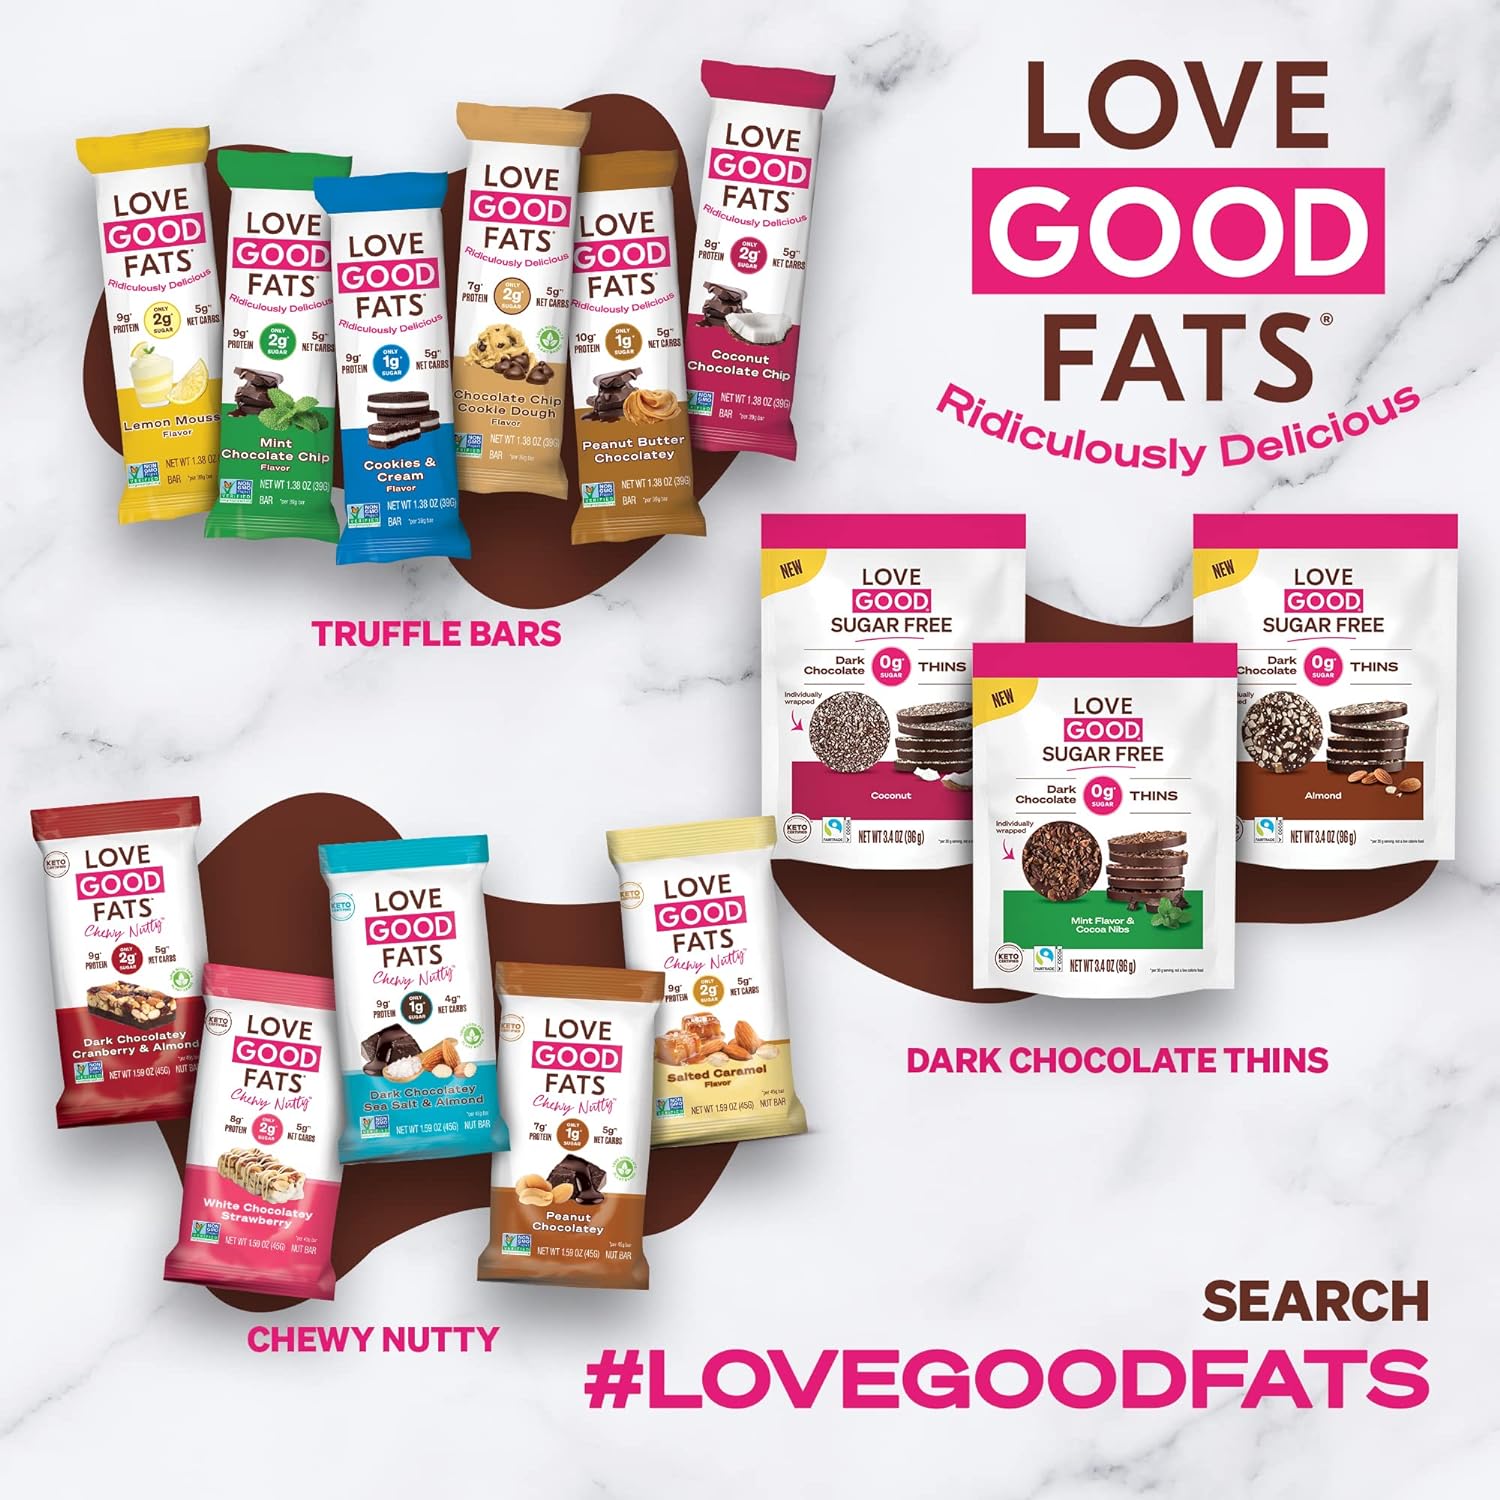 Love Good Fats Keto Protein Snack Bars - Chewy Nutty Salted Caramel with Almonds and White Chocolate - 15g Good Fats, 9g Protein, 5g Net Carbs, 2g Sugar, Gluten-Free, Non GMO, 12 Pack